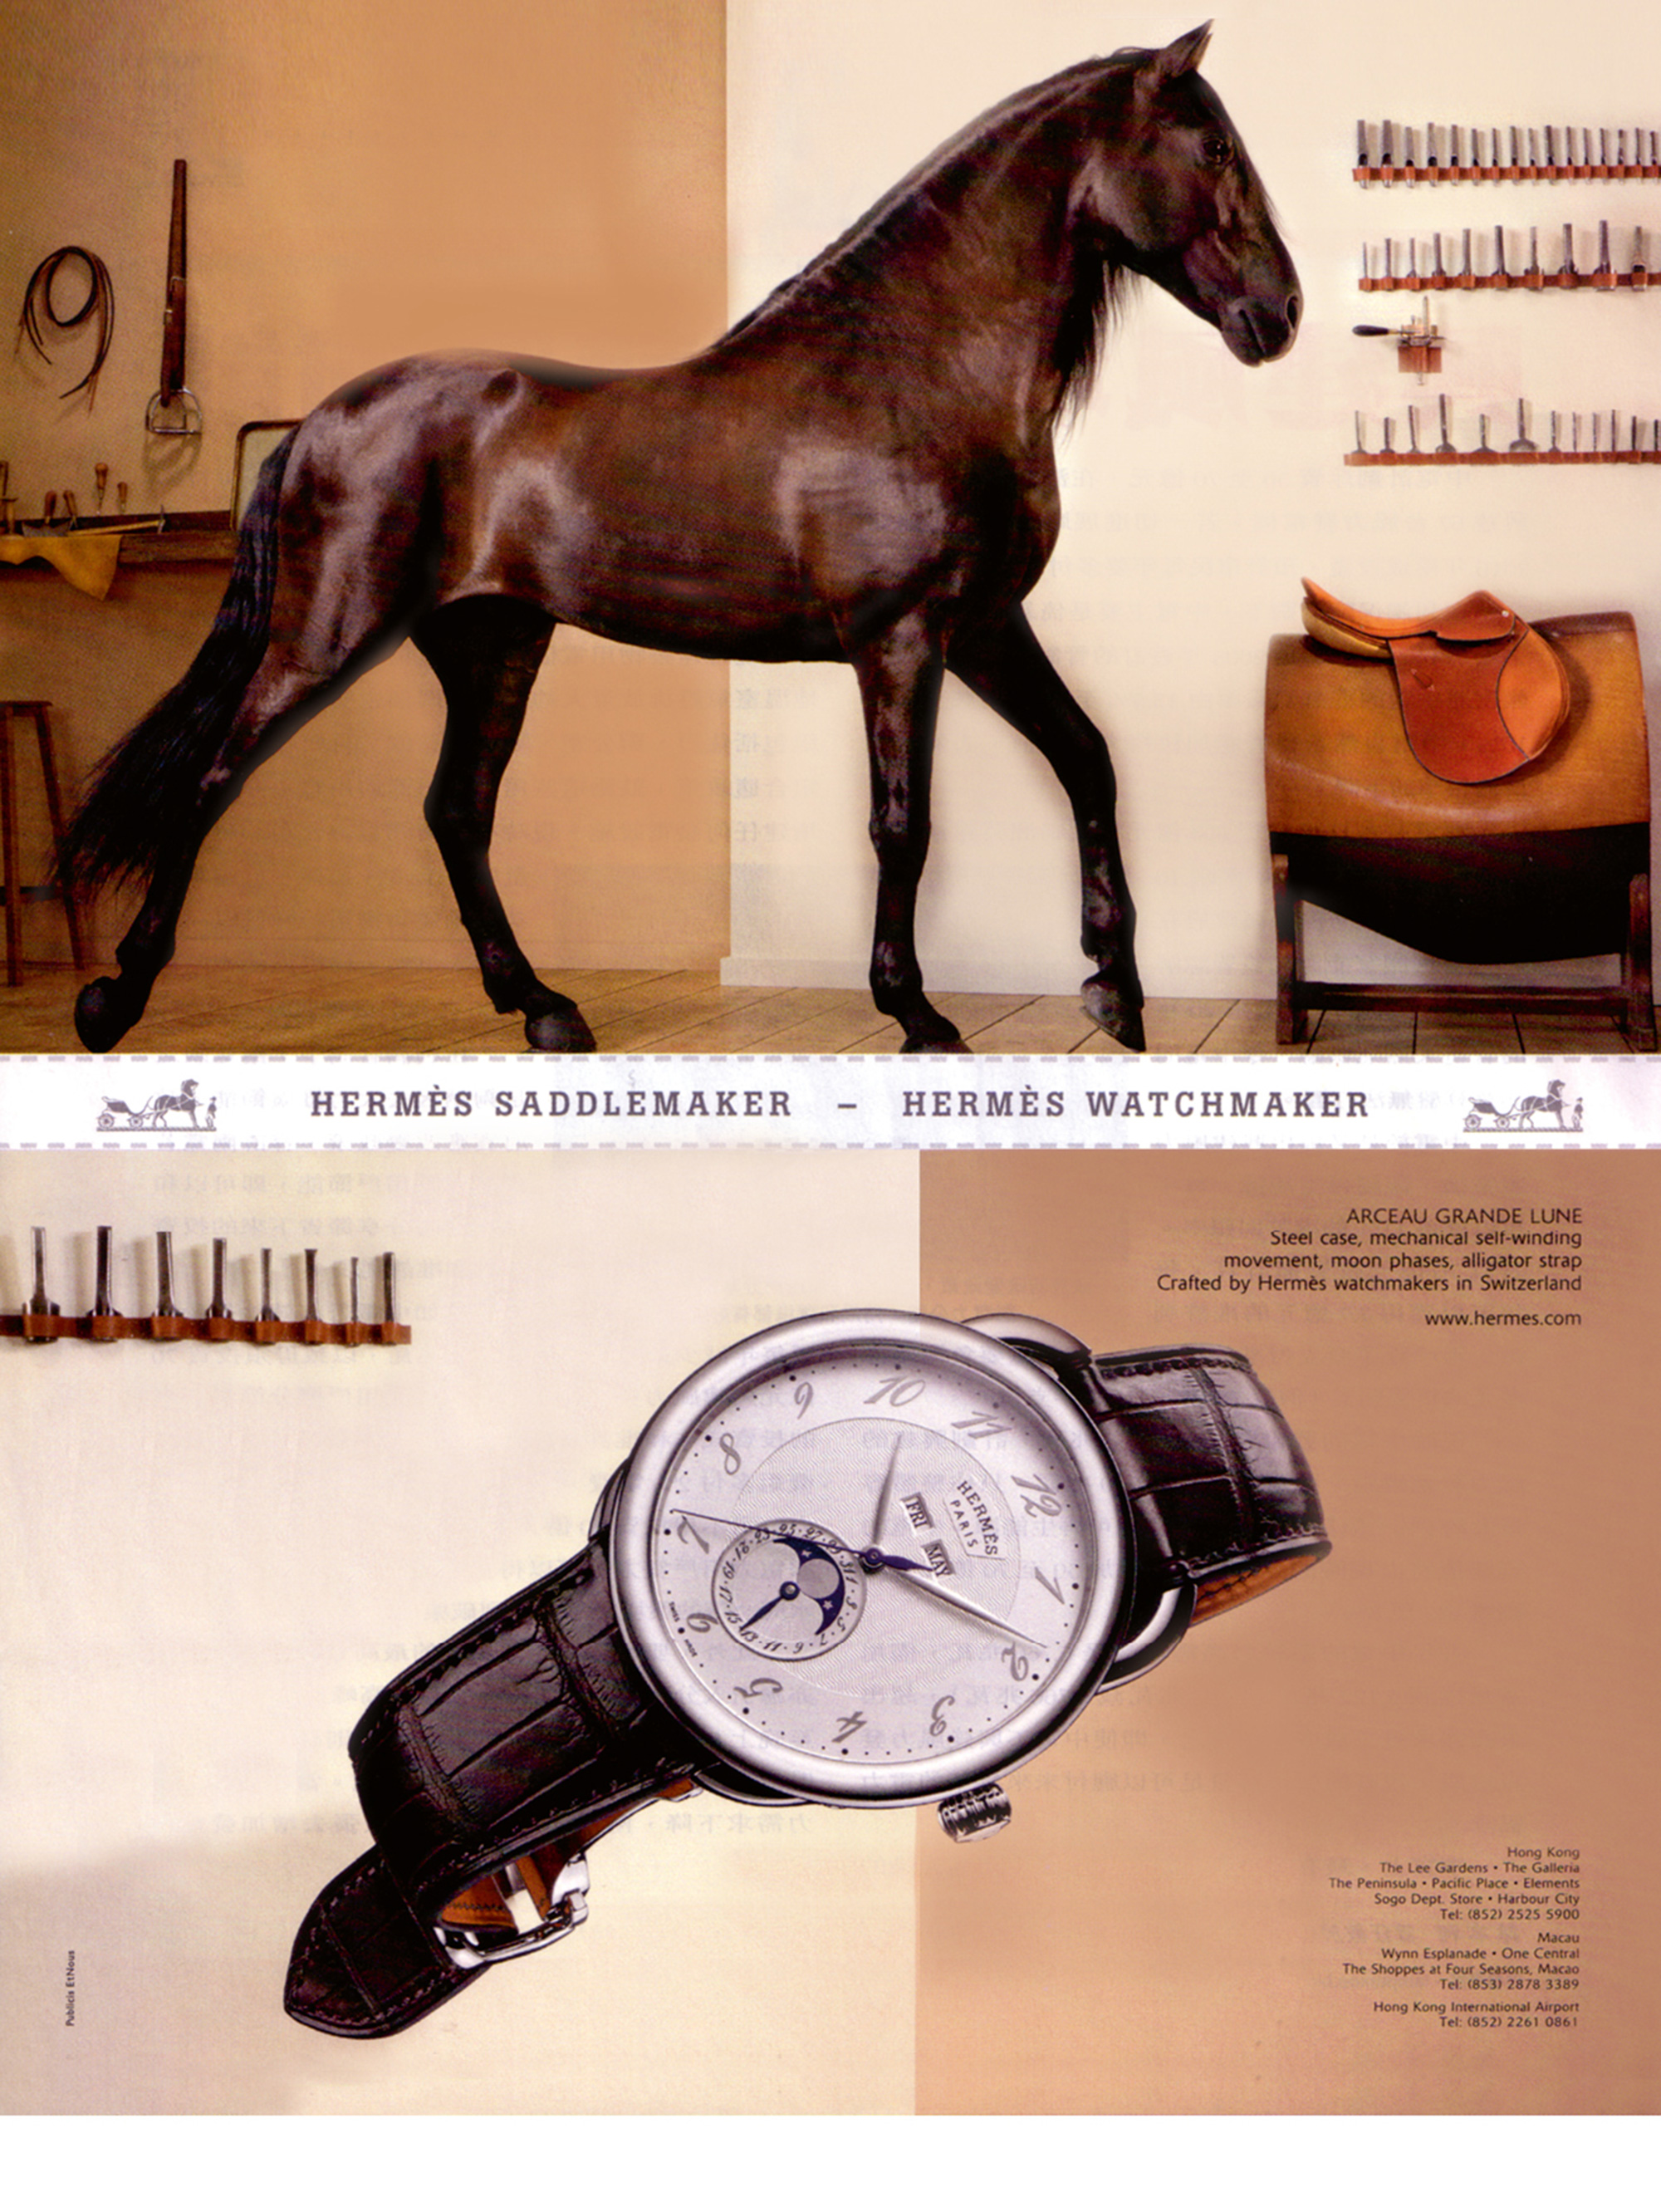 An advertisement for Hermès, which juxtaposes a horse saddle and leather watch strap.  